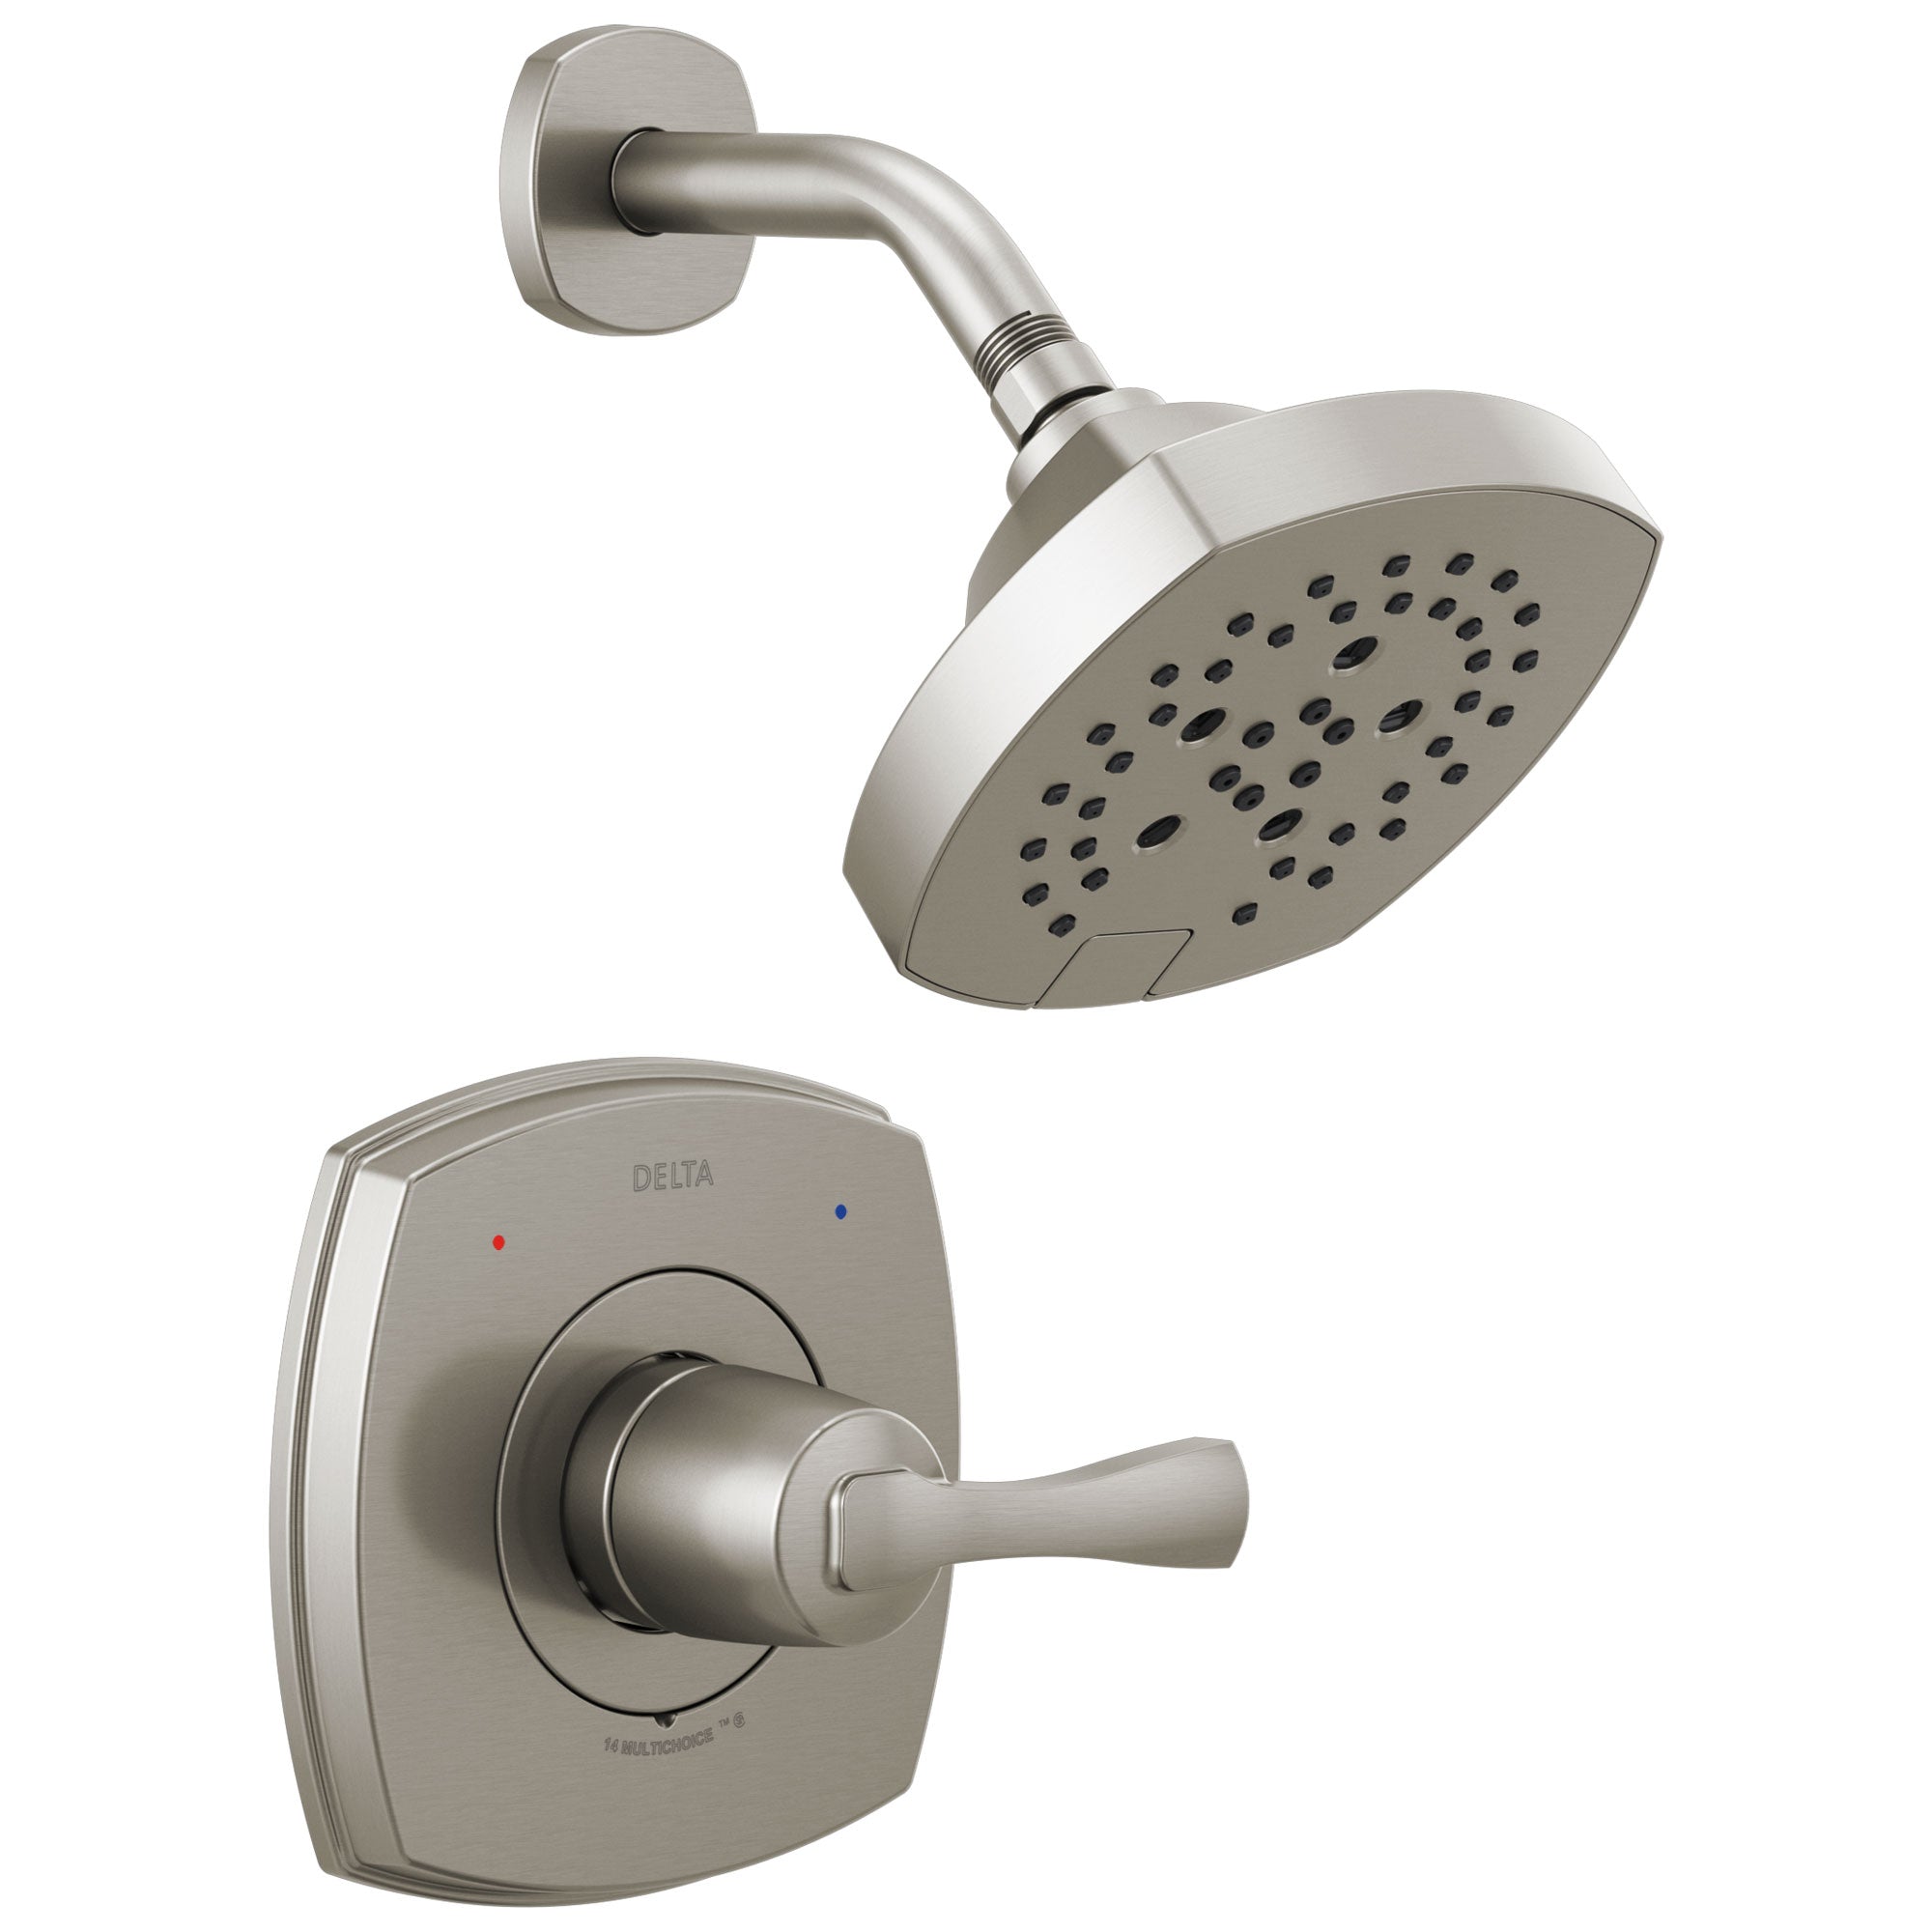 Delta Stryke Stainless Steel Finish 14 Series Shower Only Faucet Includes Single Lever Handle, Cartridge, and Rough-in Valve with Stops D3486V